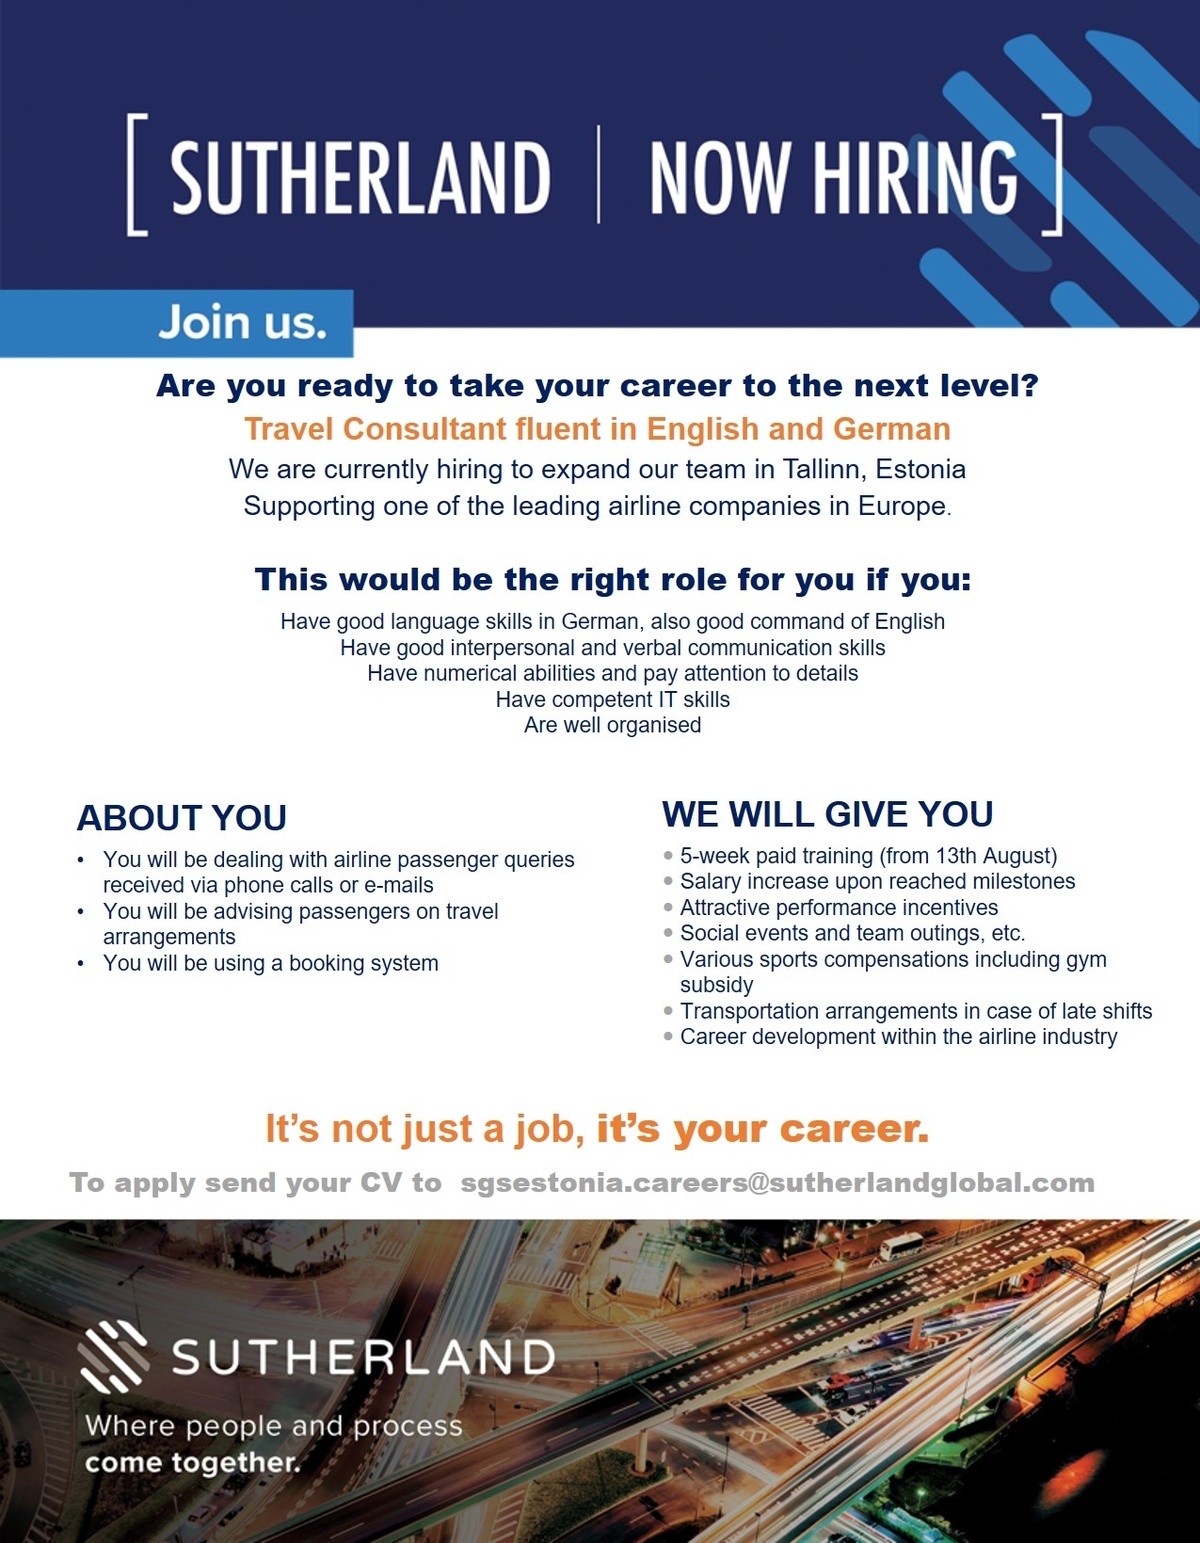 Sutherland Global Services OÜ Consultant for travels fluent in German! Make your career move!